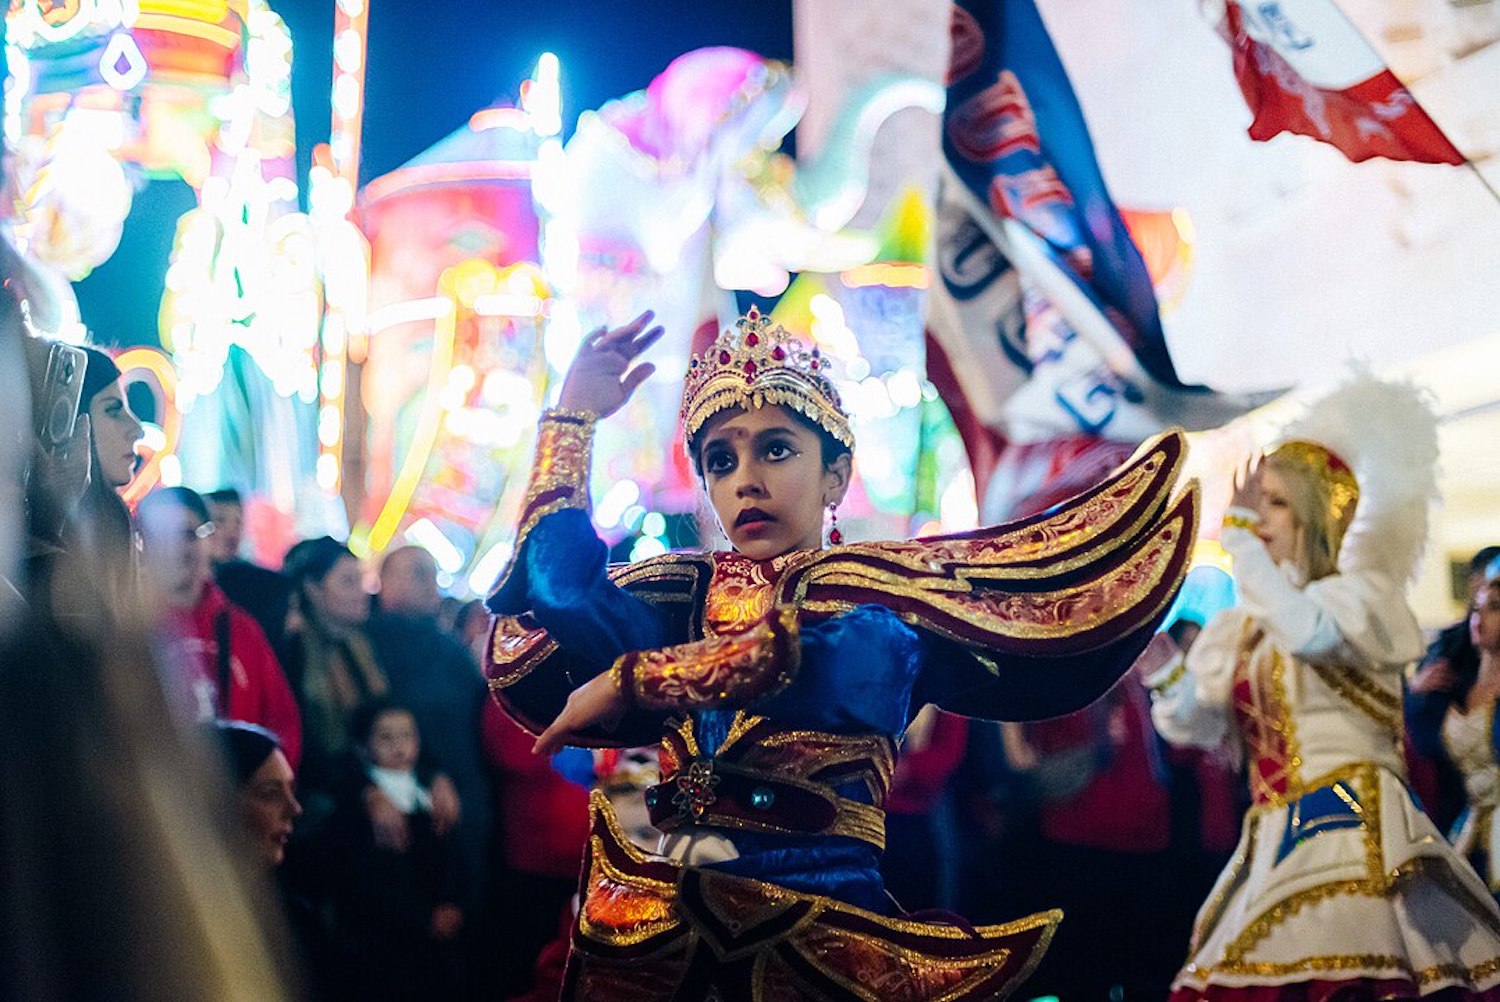 Malta's Carnival Is full of colour, celebration and history